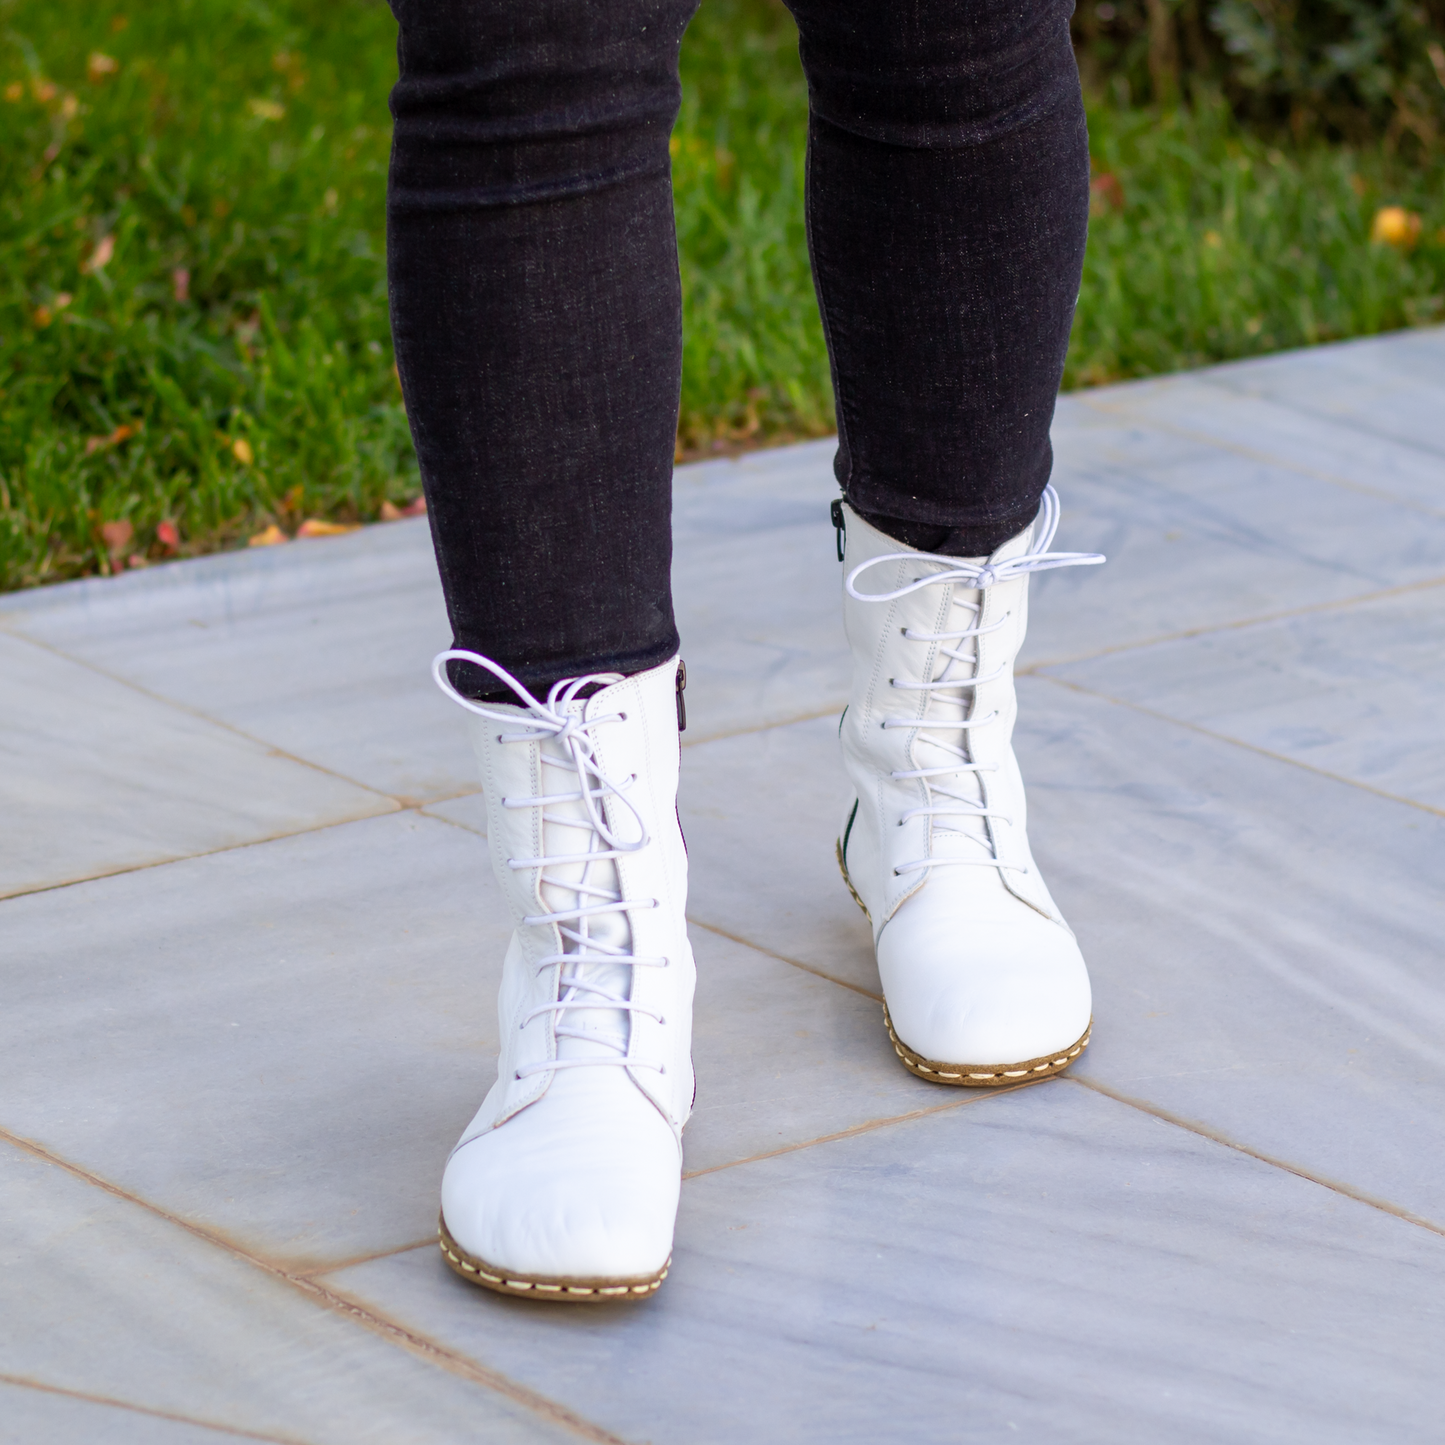 White Boot | Barefoot Boots Women | Earthing Leather Boots | Grounding Copper Rivet | Buffalo Leather Outsole | White